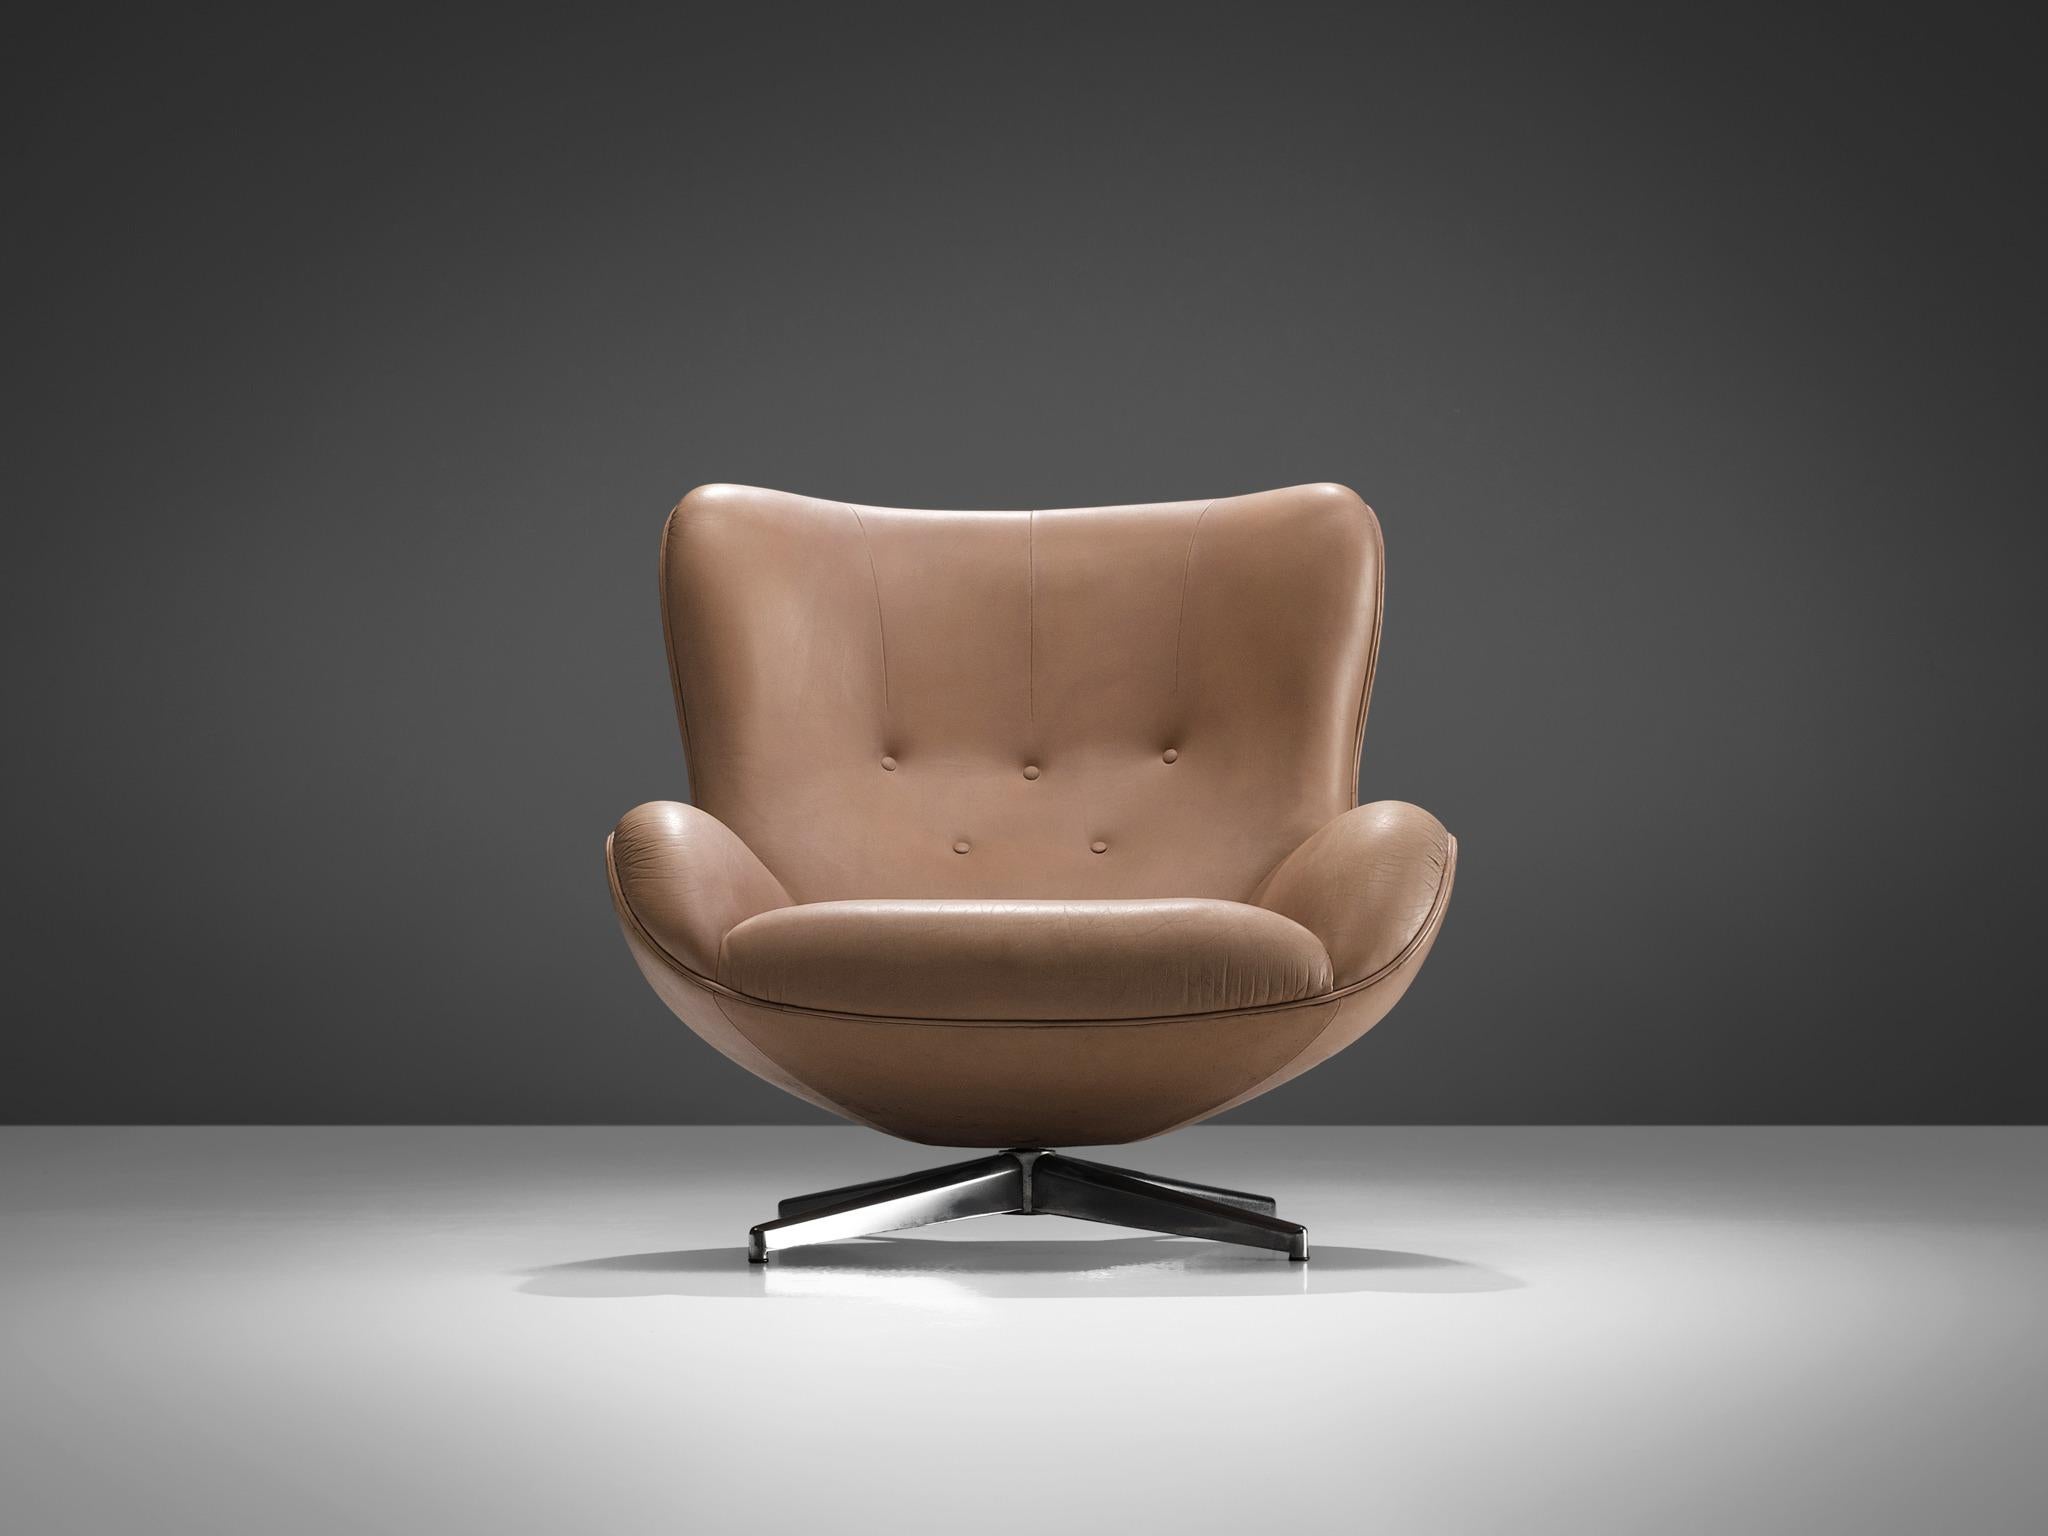 Illum Wikkelsø for A. Mikael Laursen, swivel lounge chair model ML214, cognac leather and metal, Denmark, 1960s.

Organic shaped easy chair in patinated cognac leather by Danish designer Illum Wikkelsø. This swivel chair shows some nice contrasts.